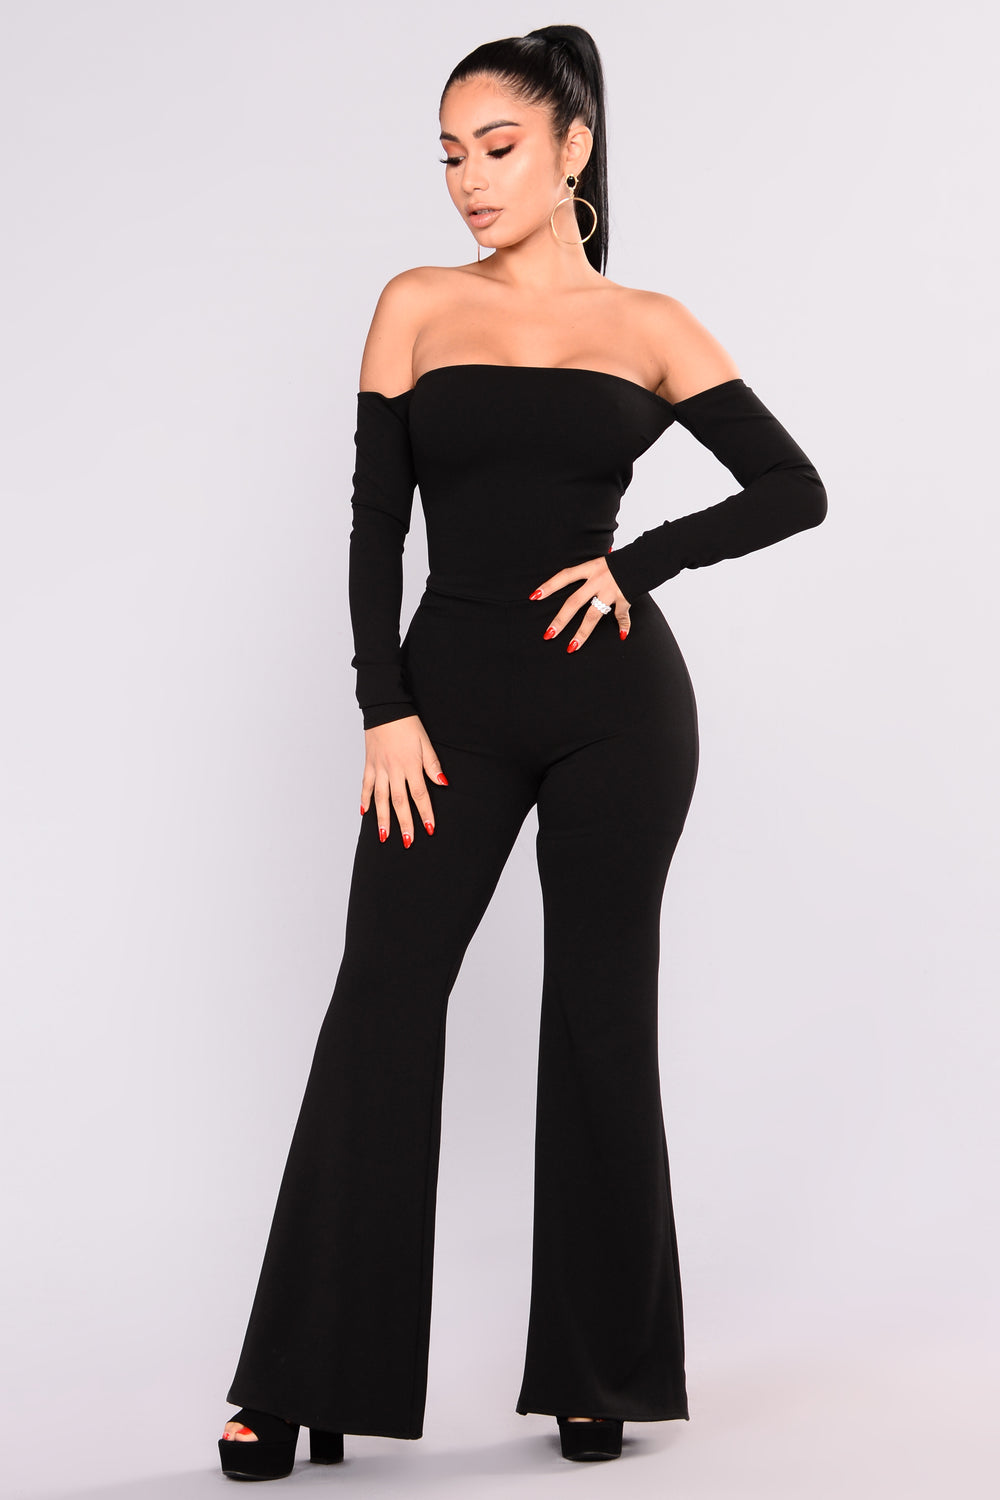 Never Forget You Lace Up Jumpsuit - Black